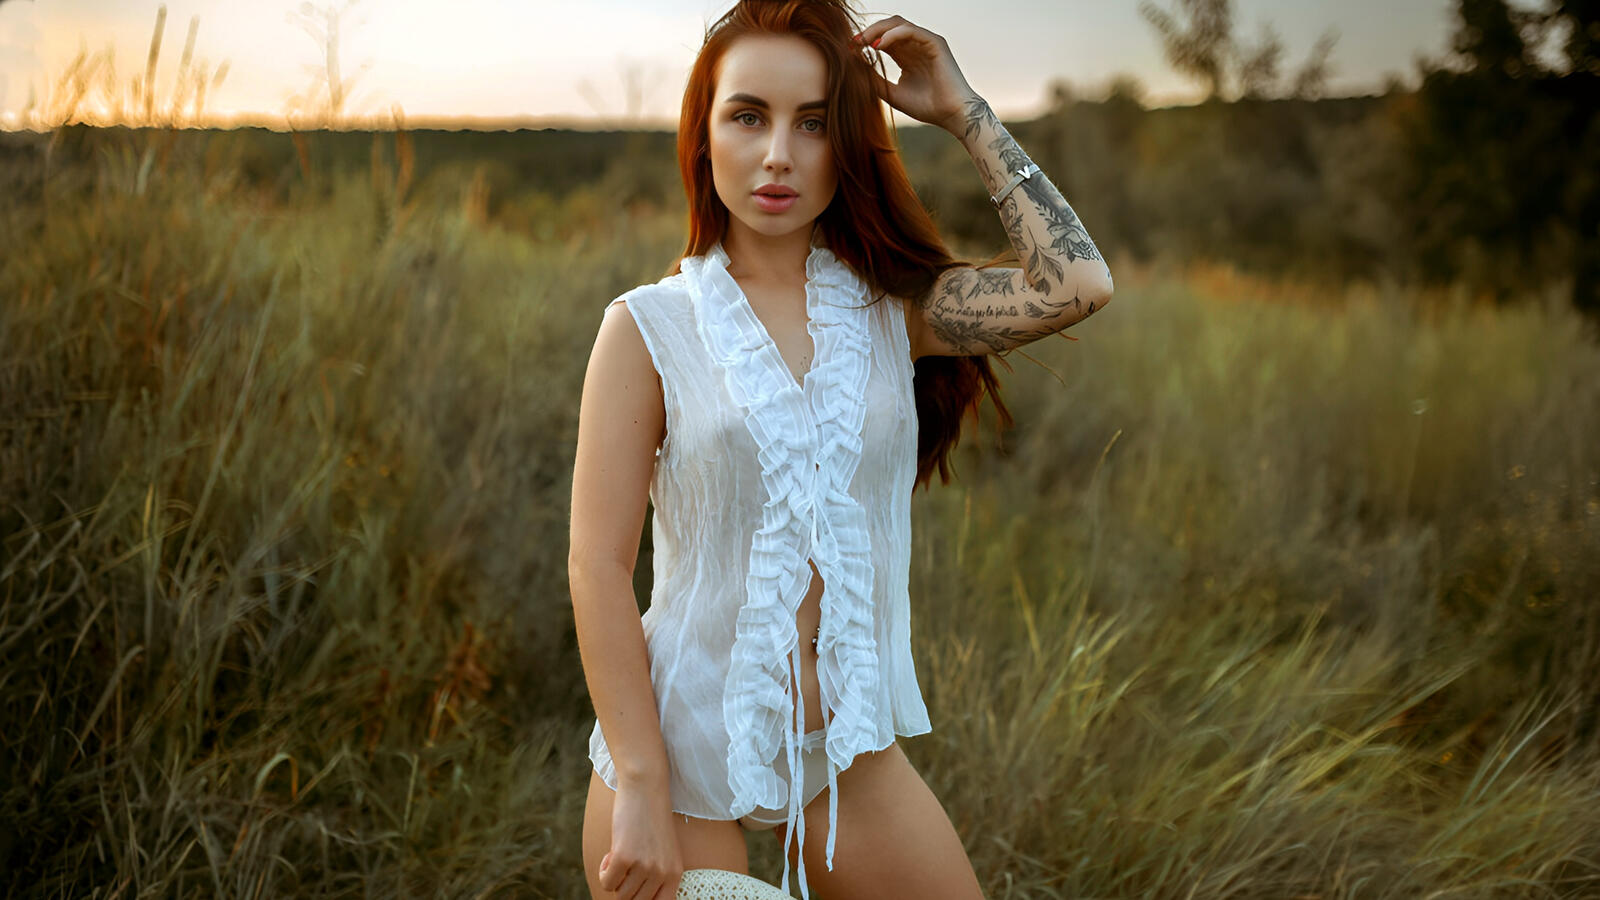 Free photo With a tattoo on her arm undressing in the field.